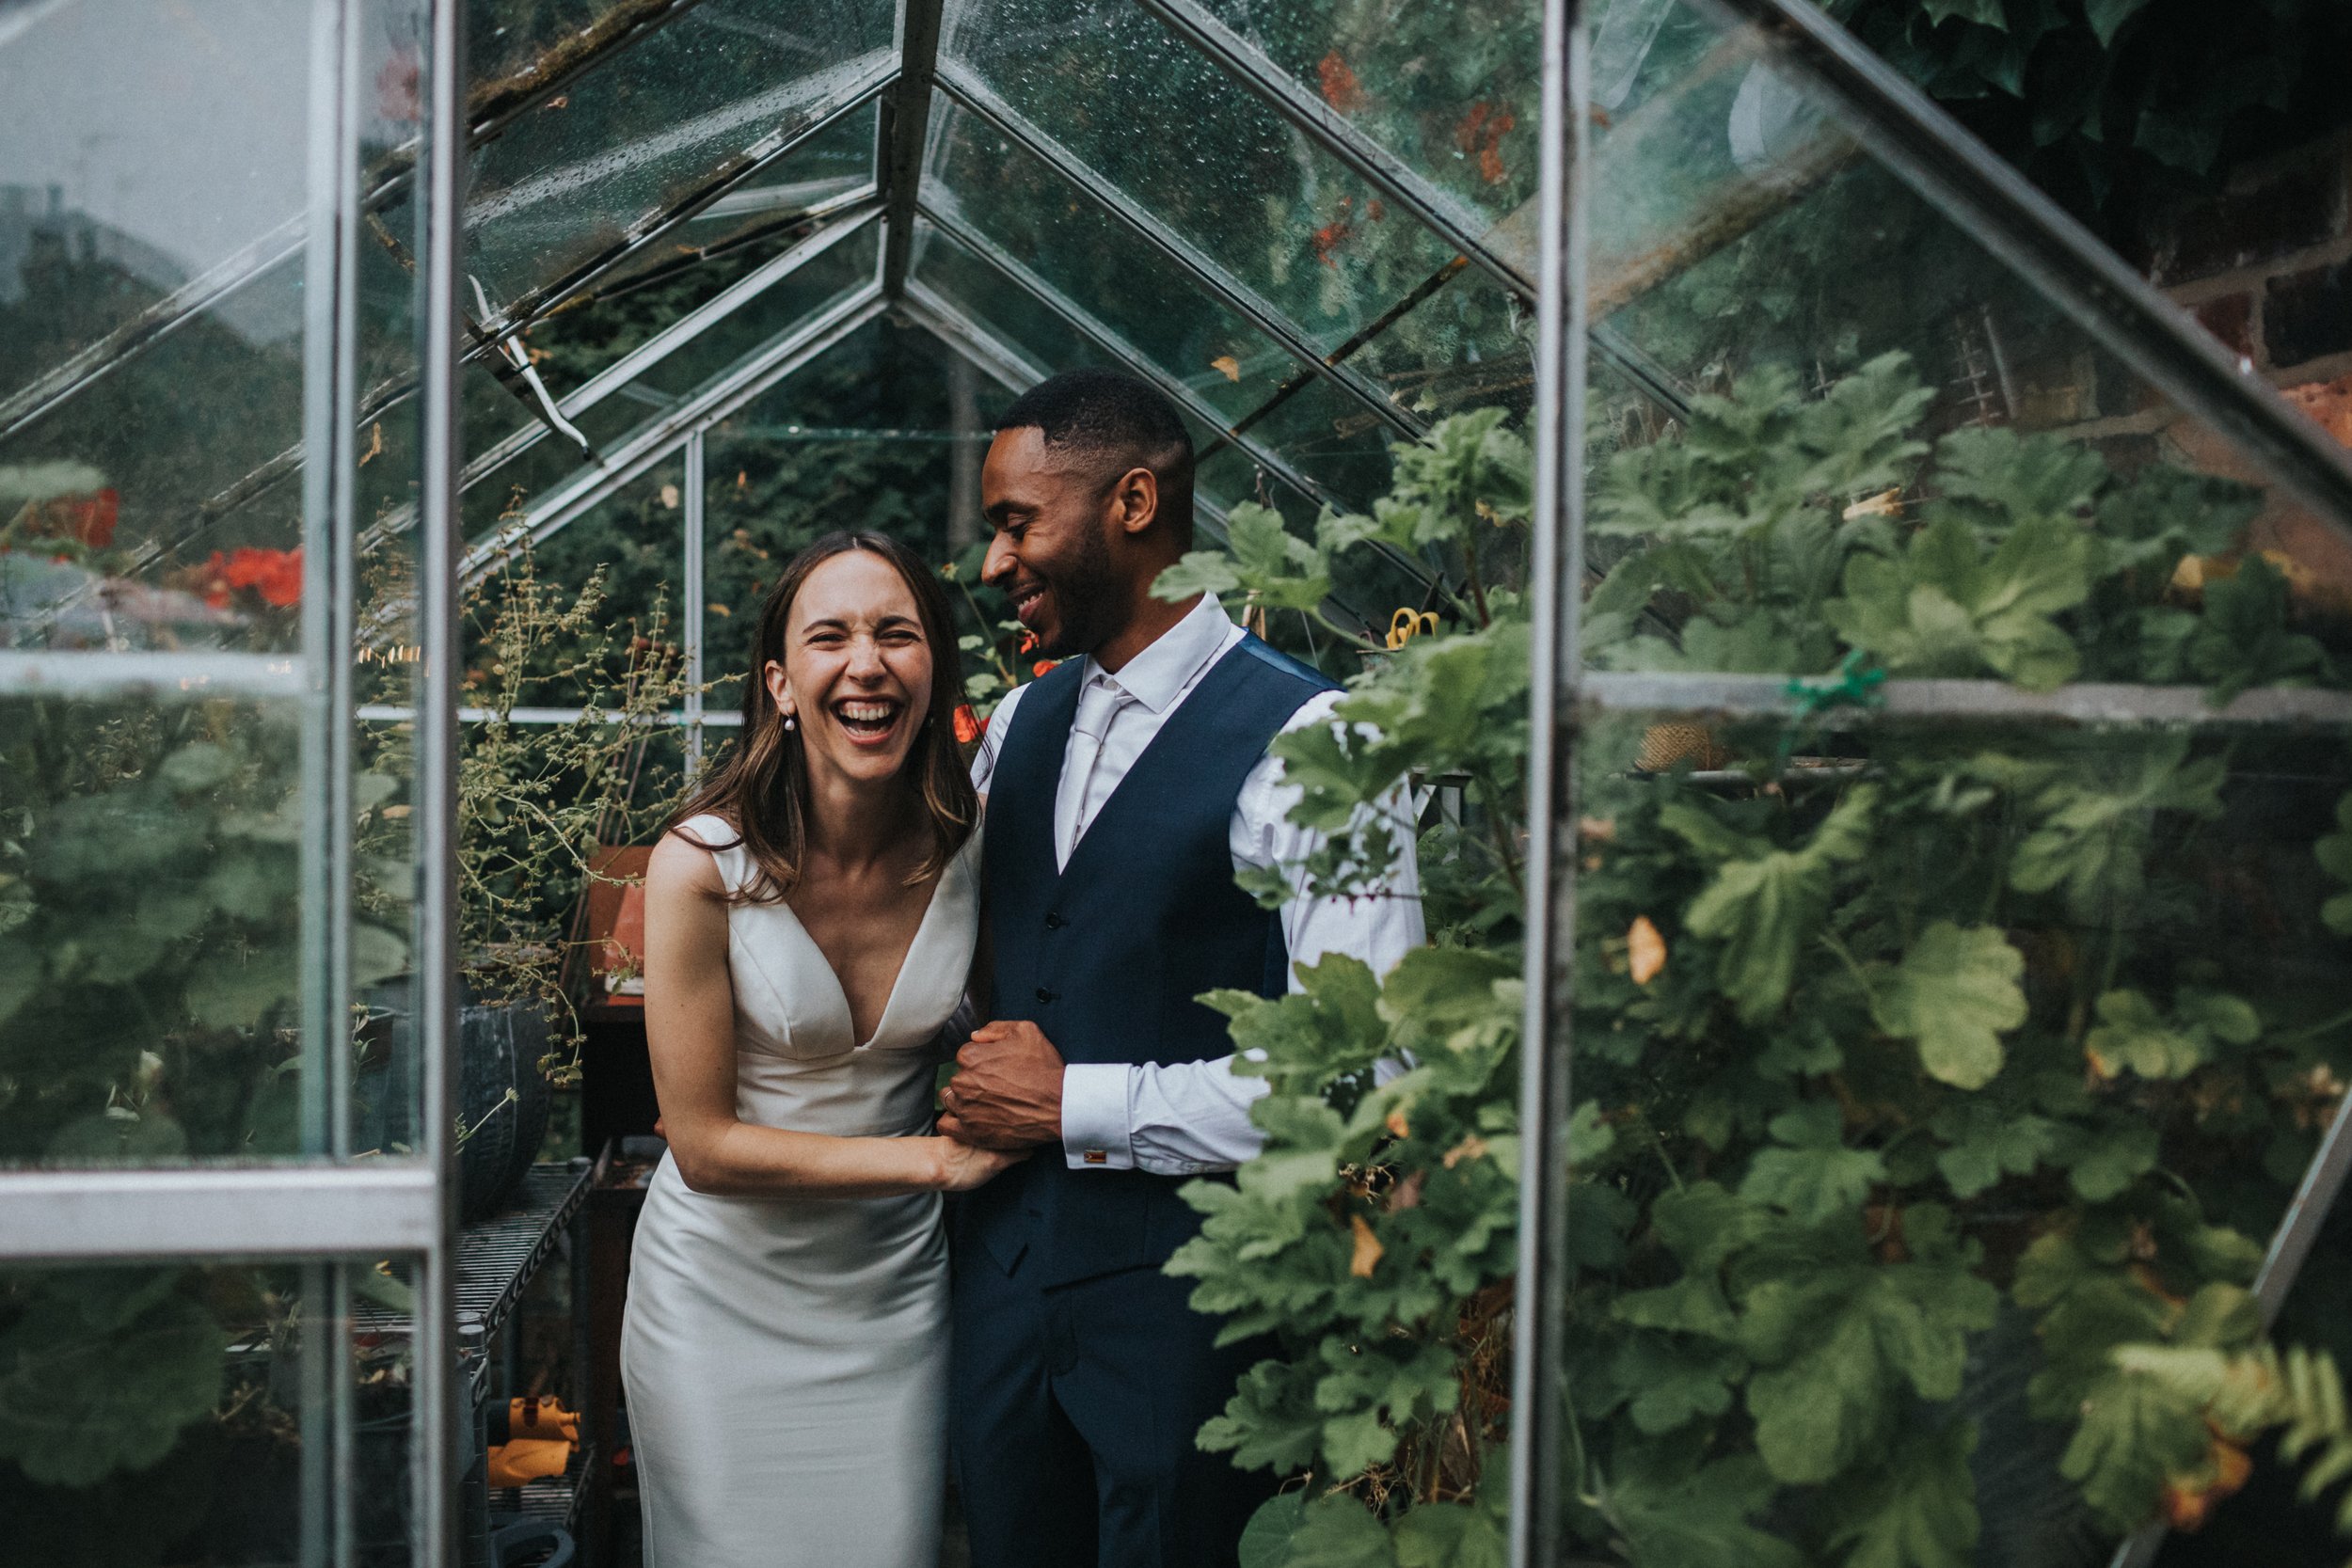 Bride and groom laughing in green house.